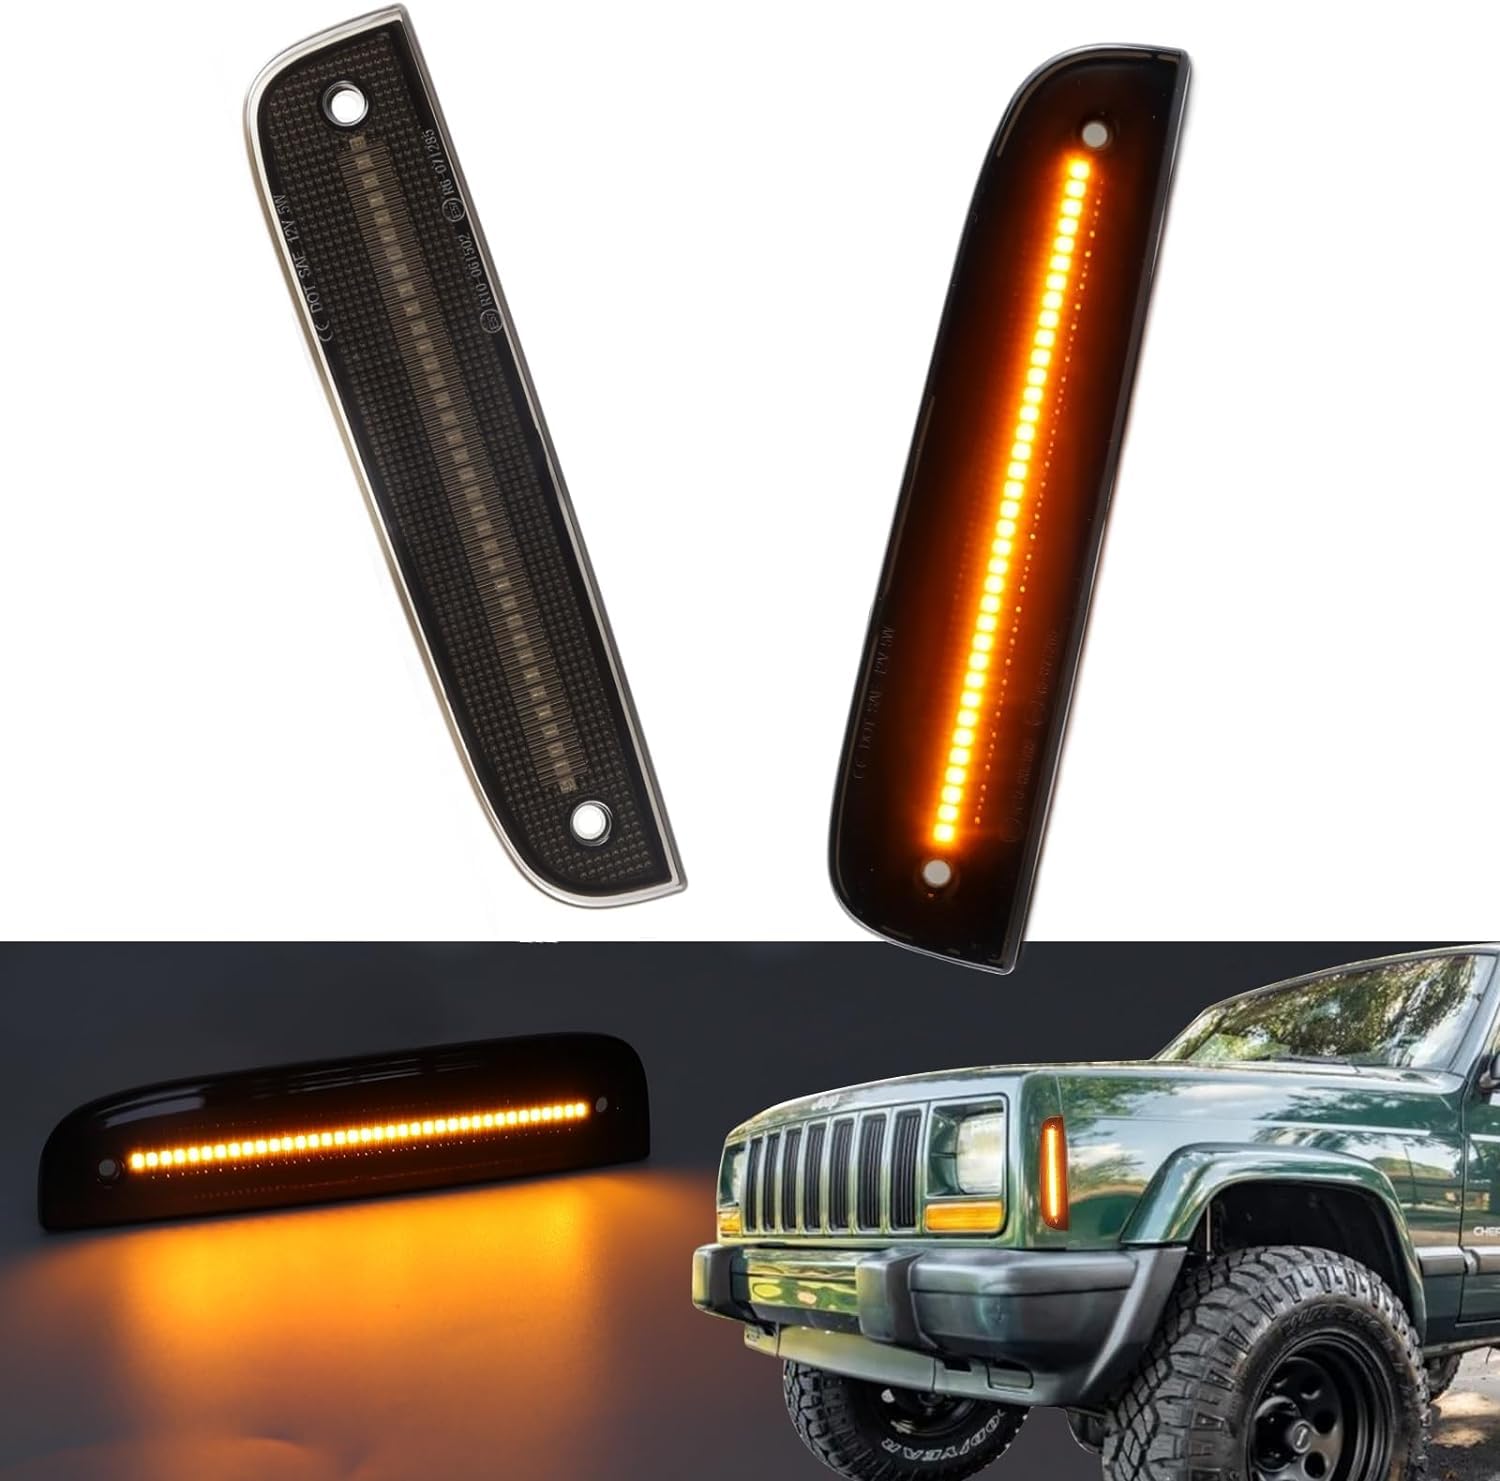 FetonAuto Amber LED Front Side Marker Lights for 1997 1998 1999 2000 2001 Jeep Cherokee XJ Chassis Front Bumper Side Corner Parking Marker Turn Signal Light, Replace OEM CH2551118 von FetonAuto